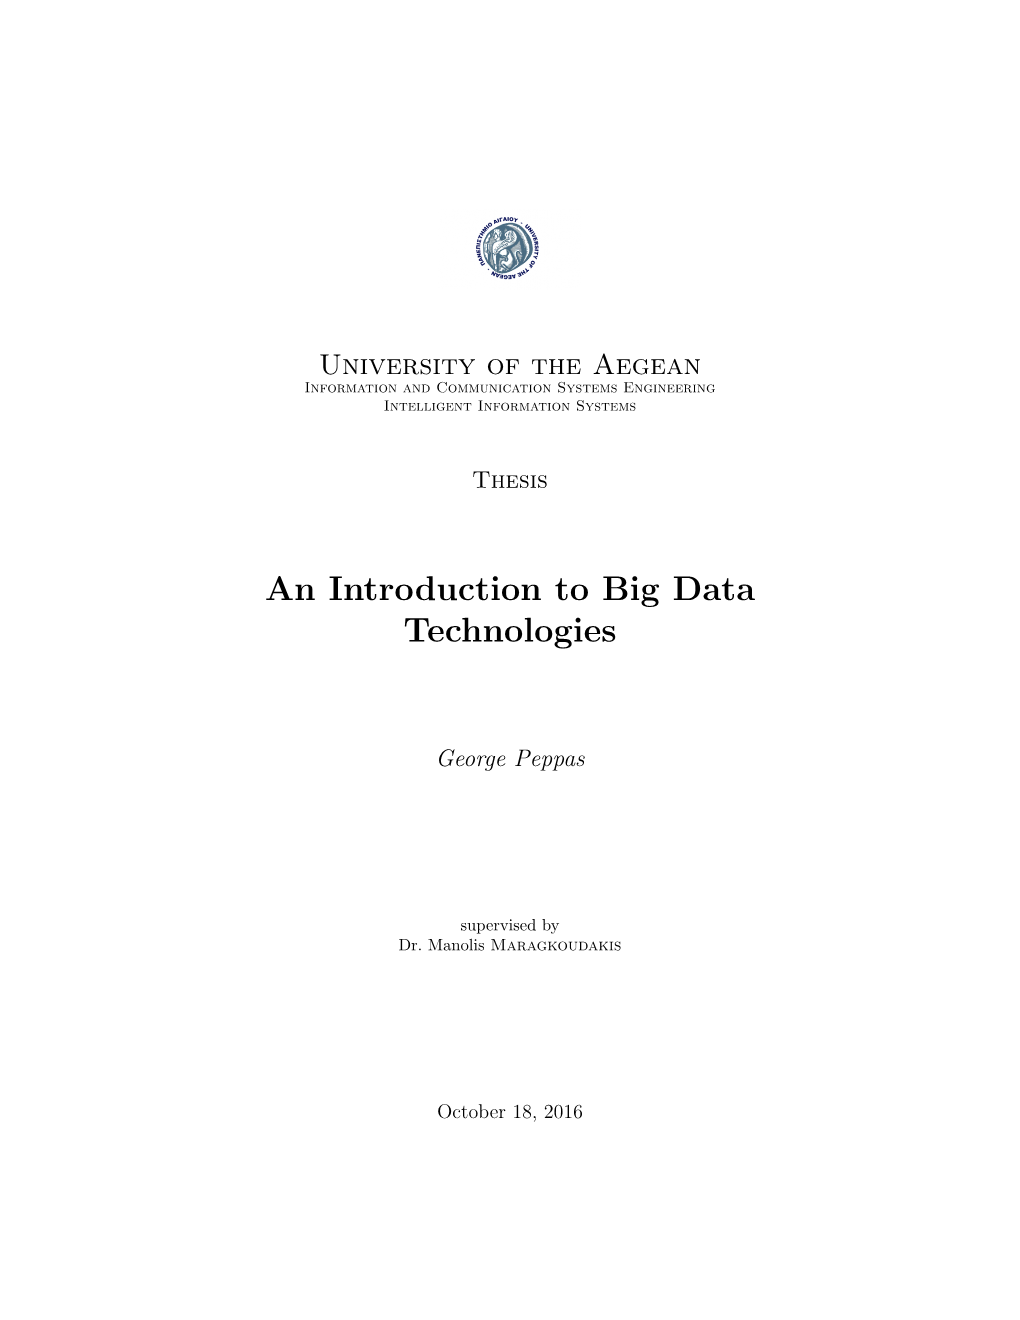 An Introduction to Big Data Technologies